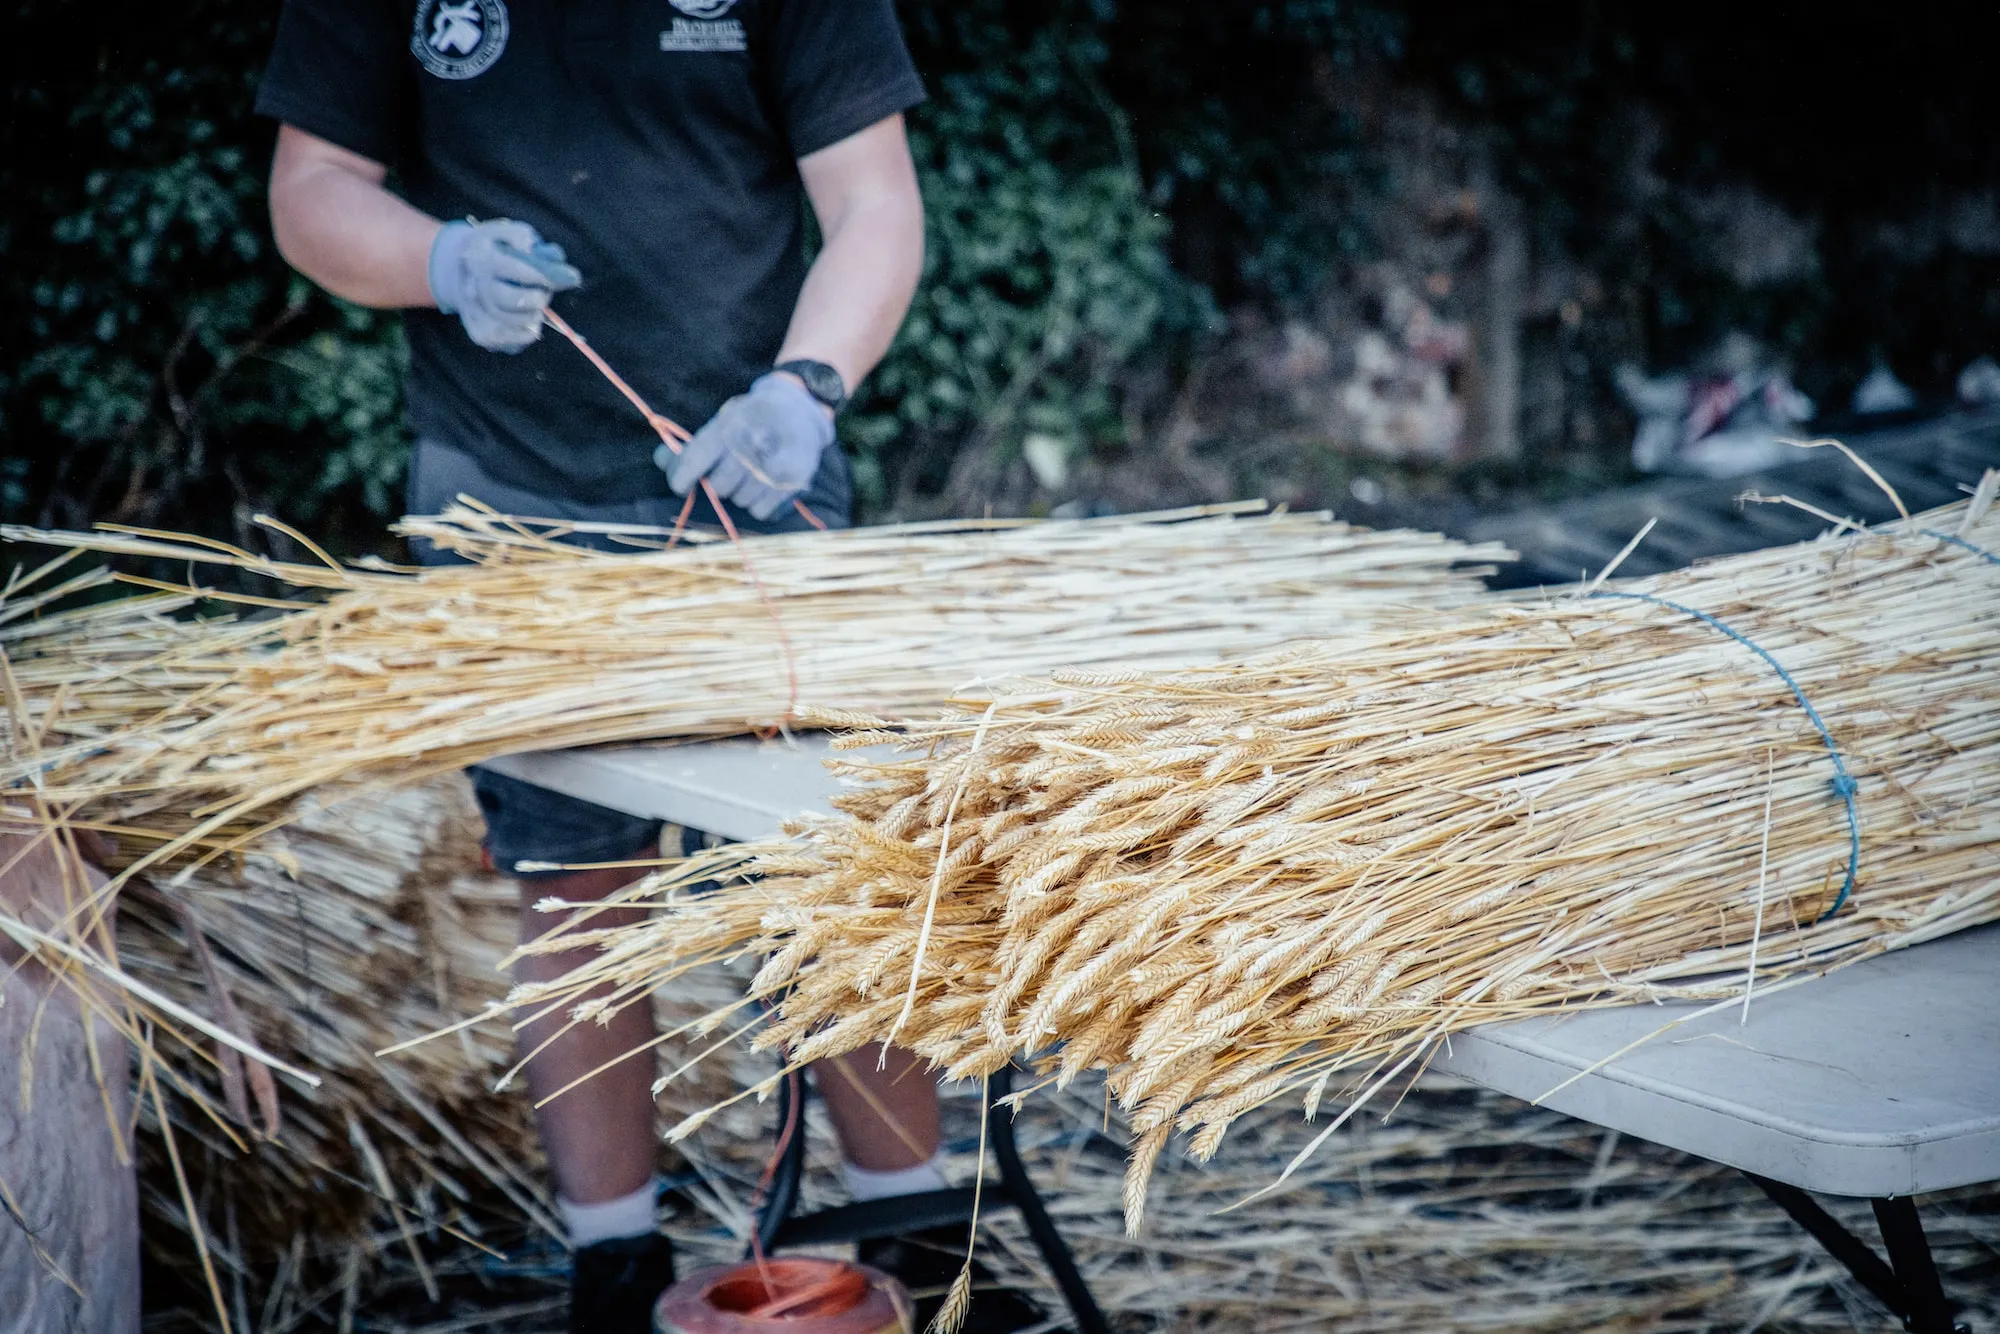 A thatcher tying crop together ready to thatch a roof
